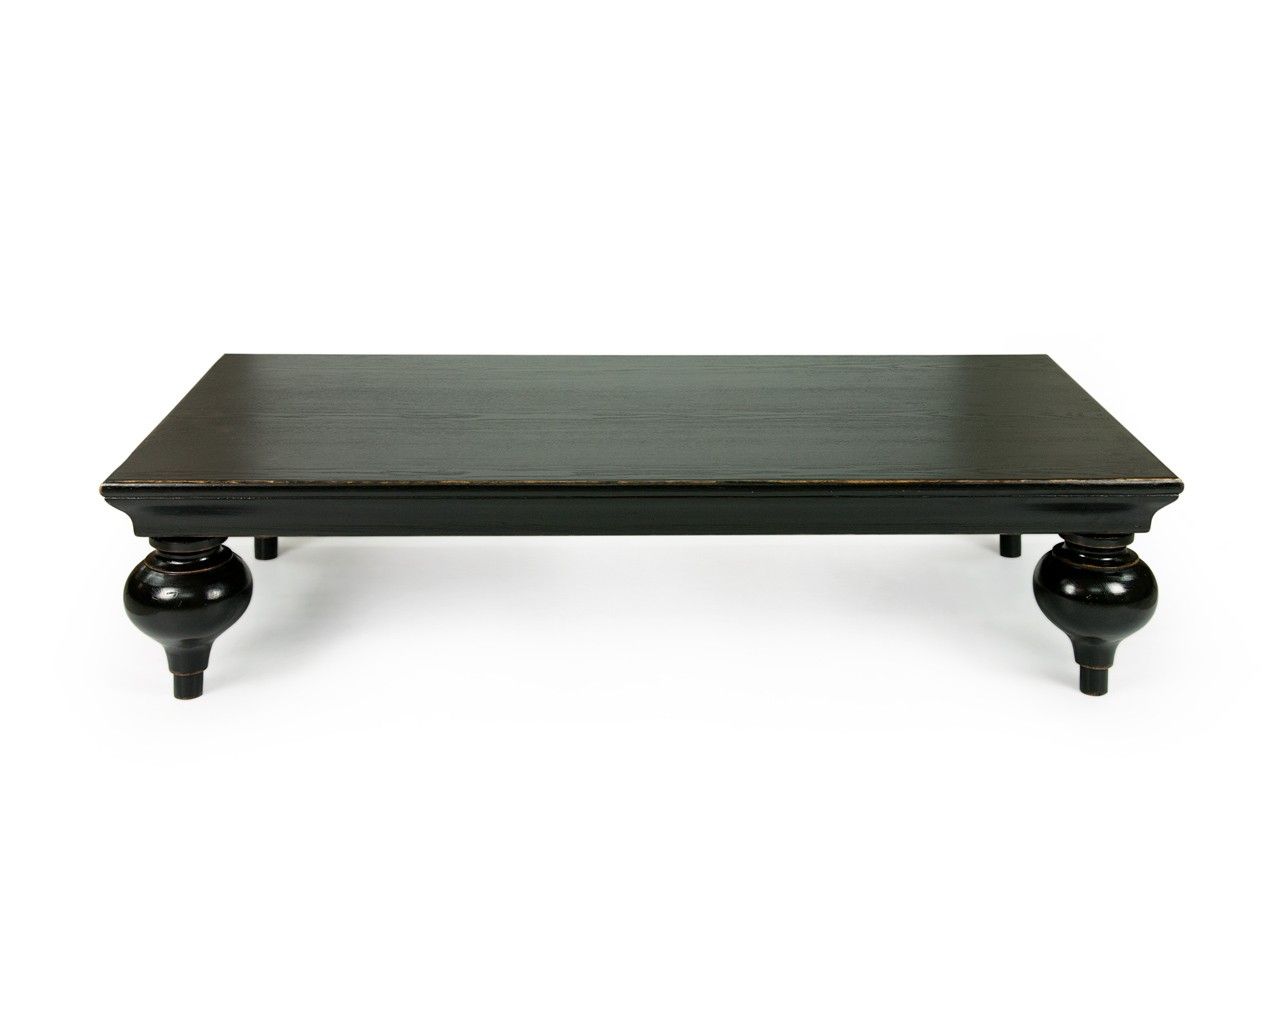 shanxi oriental black coffee table with exotic ball leg design lacquer accent low level height and sleek finish distressed edging this bedroom dressers small antique folding